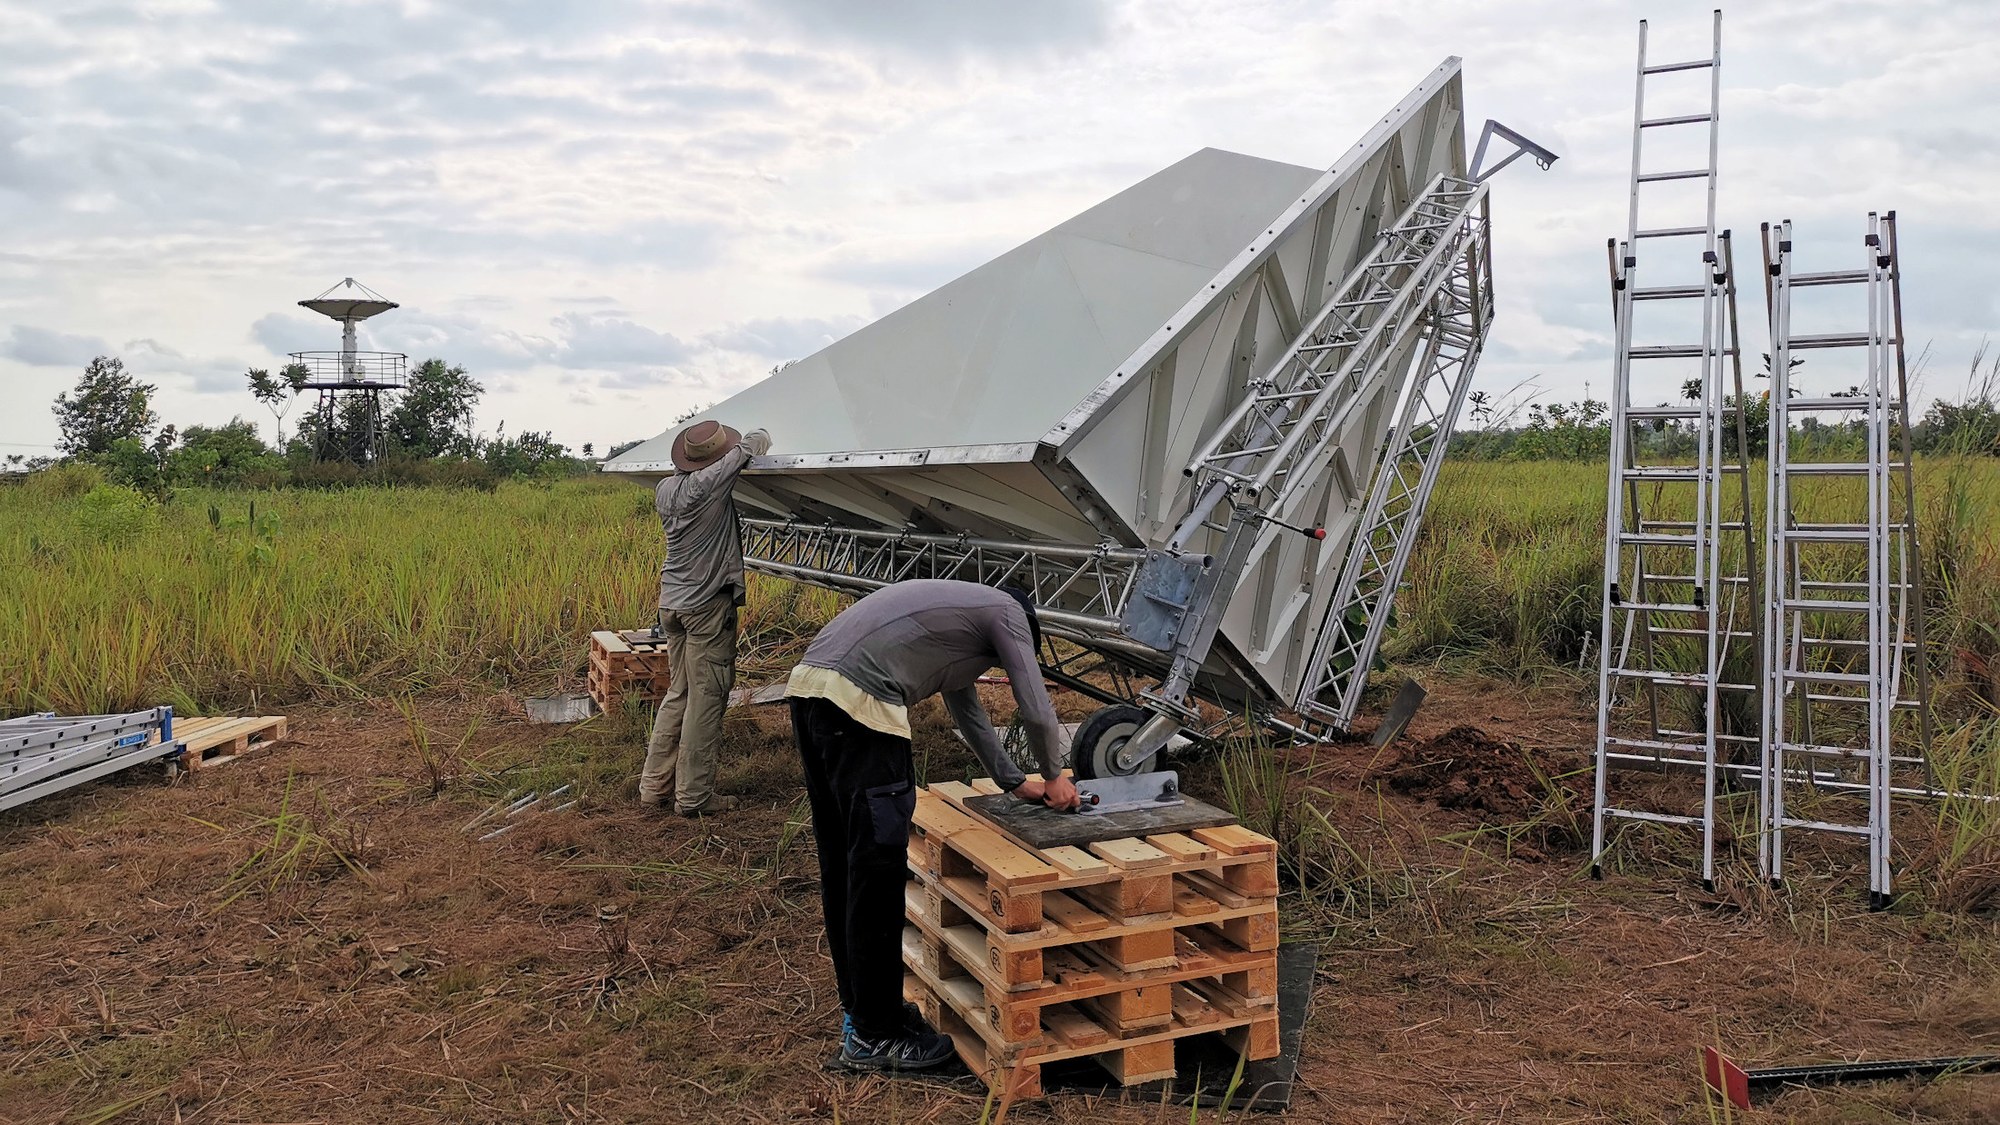 Two DLR team members setting up a special radar reflector in the 'Nkok' test area